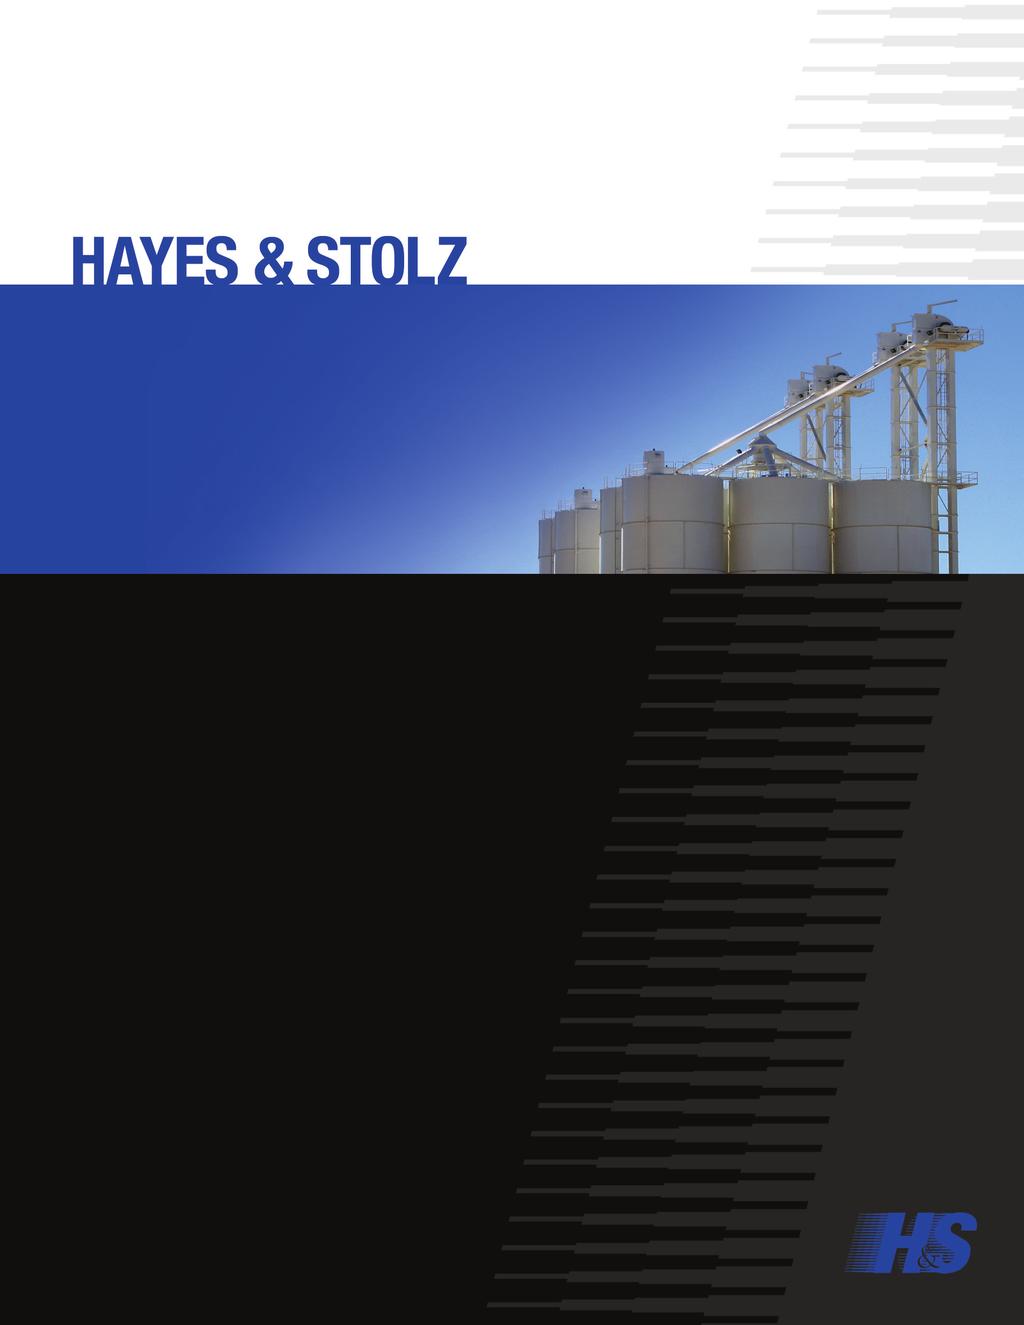 Hayes & Stolz Industrial Manufacturing Company offers a wide variety of mixing, blending, processing and material handling equipment to serve your needs, including: Batch Mixers Continuous Blenders